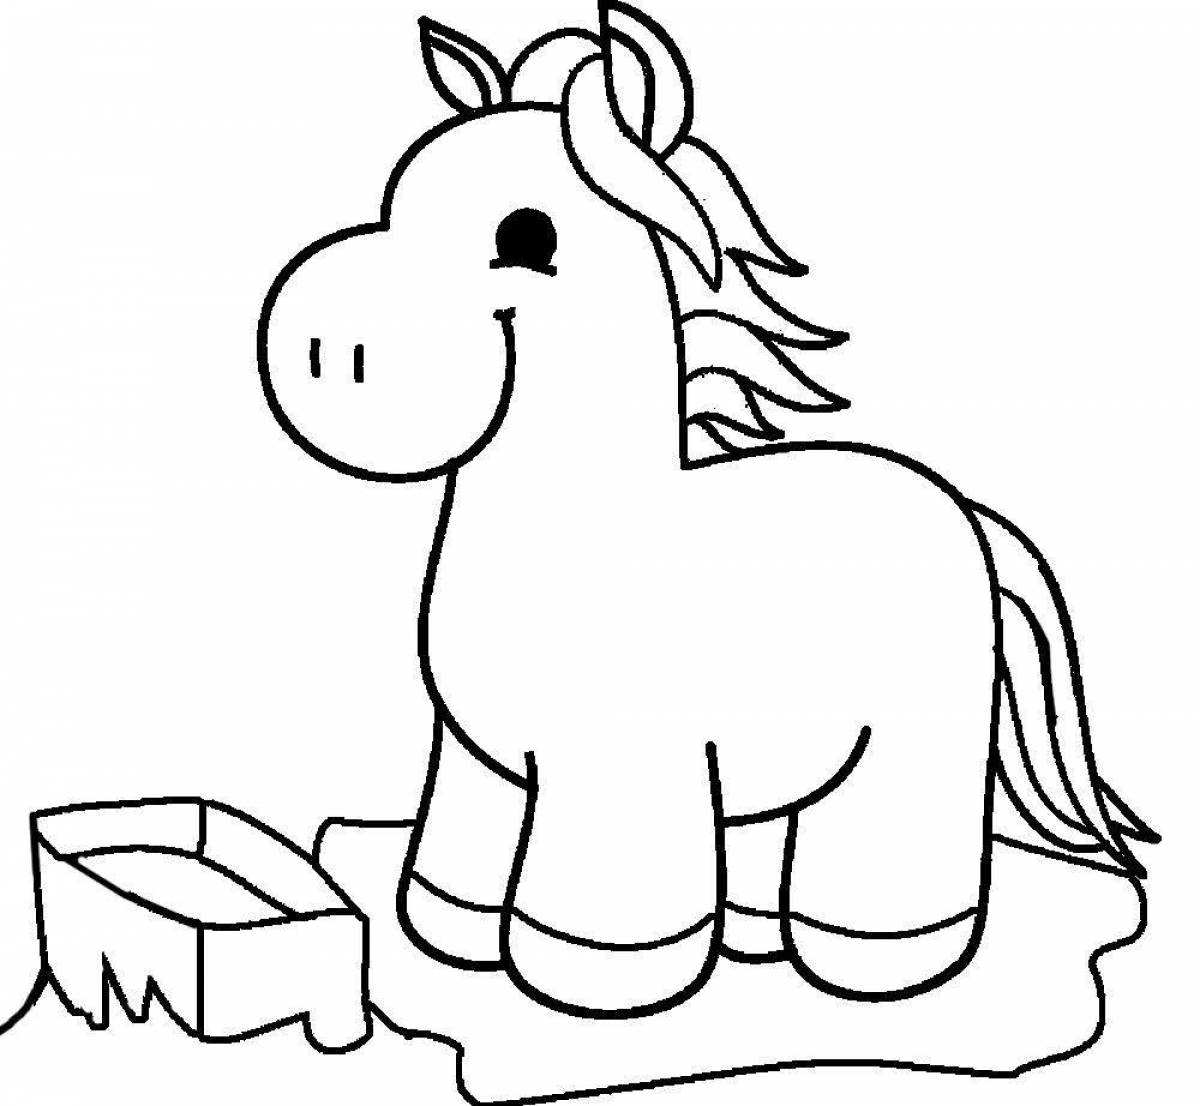 Playful Clydesdale horse coloring book for kids